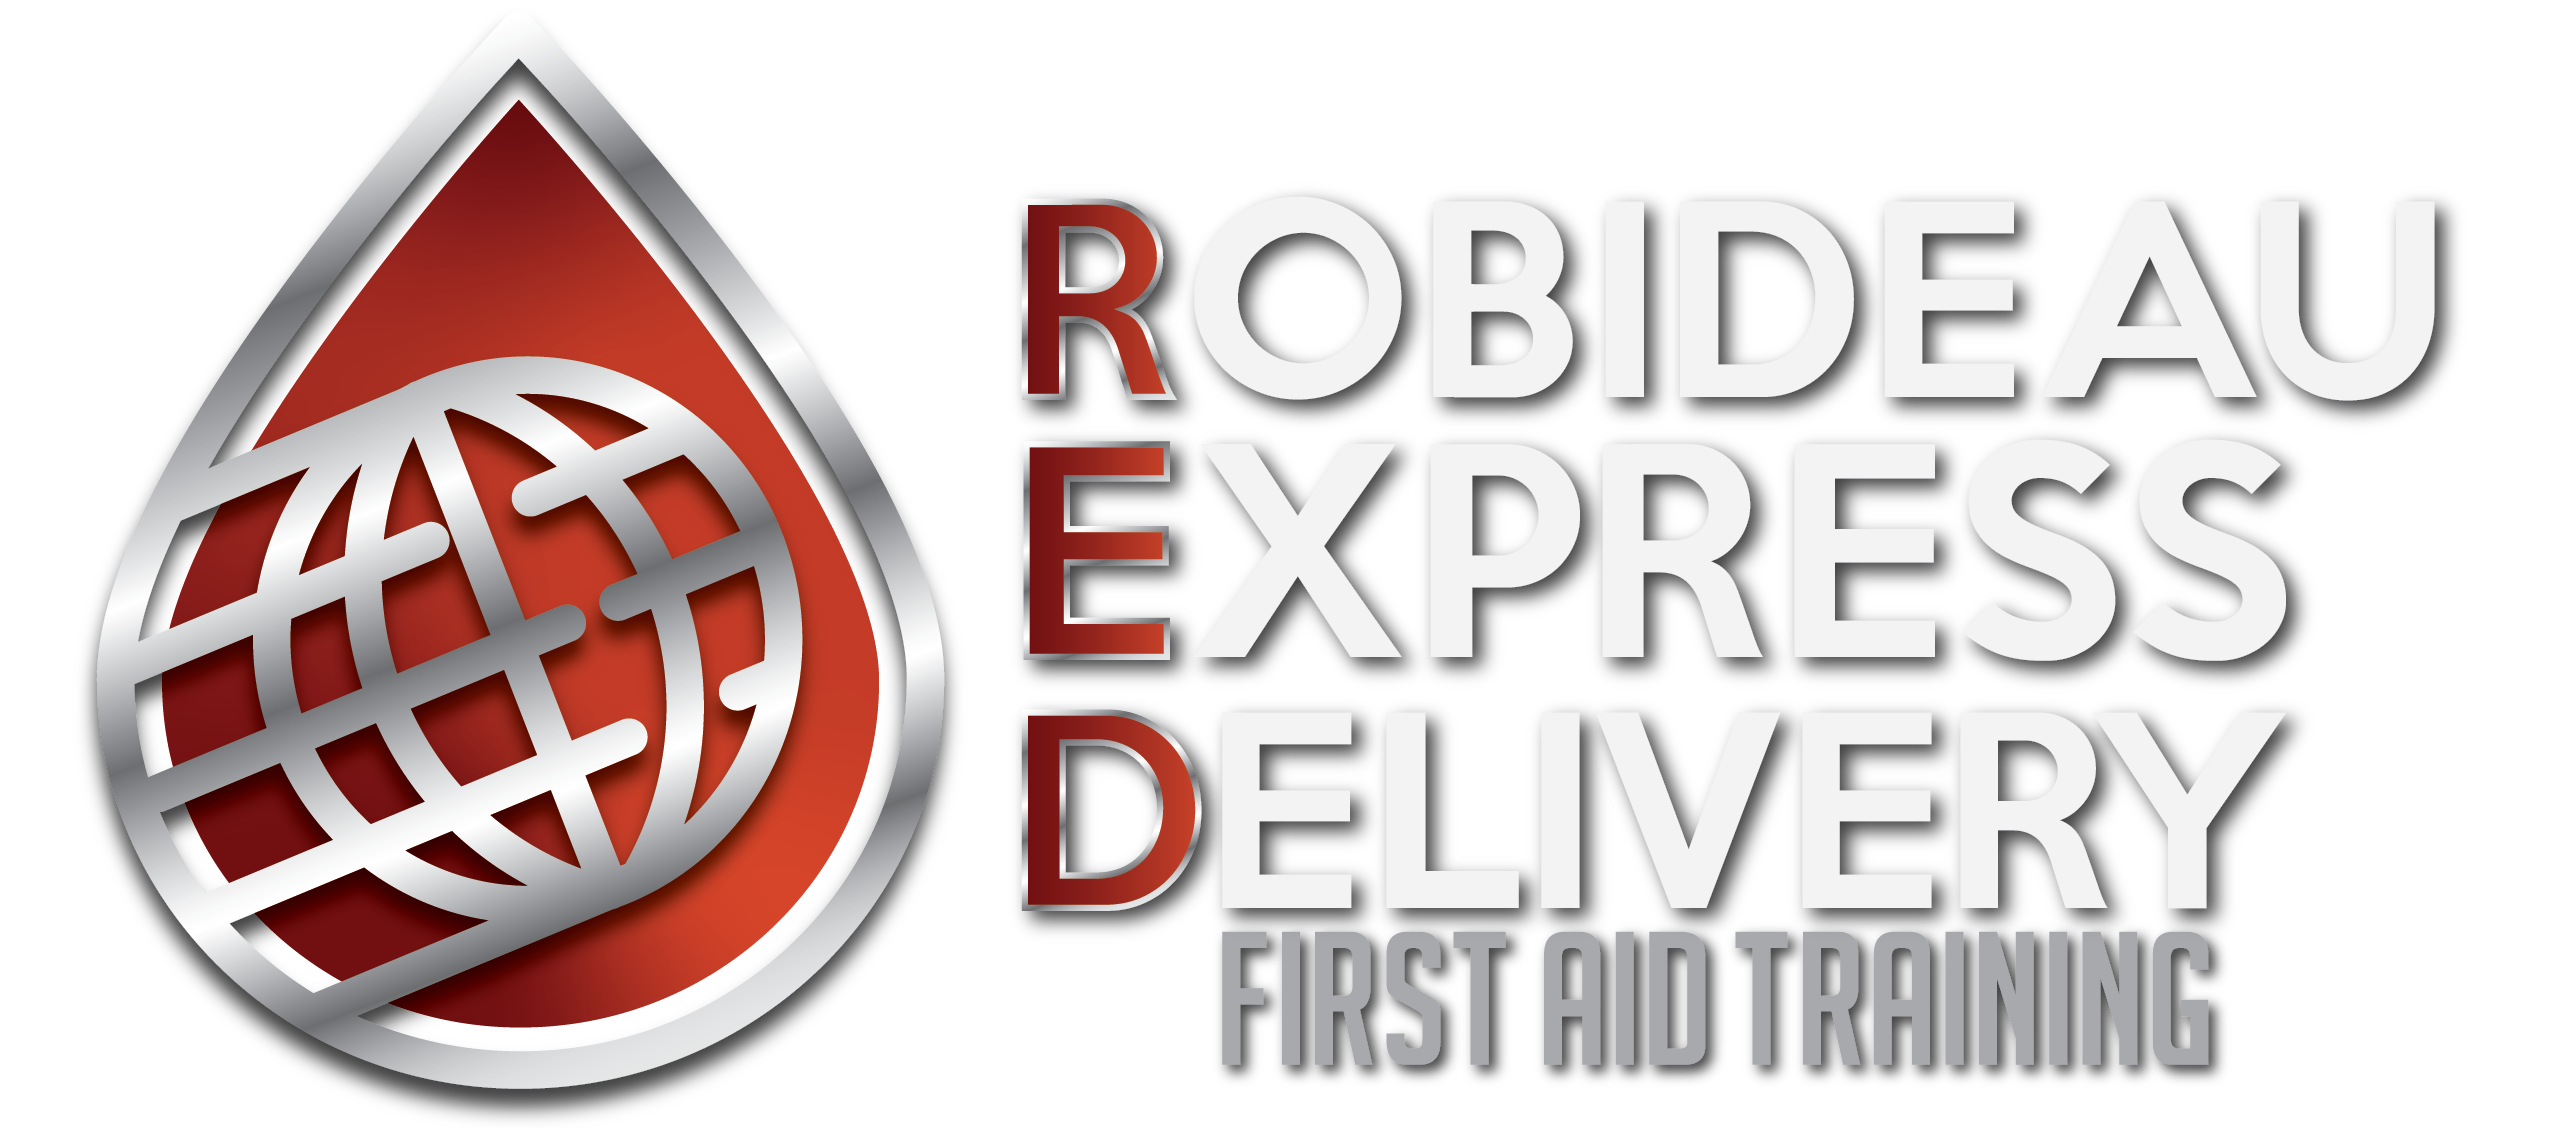 Robideau Express Delivery Safety Training